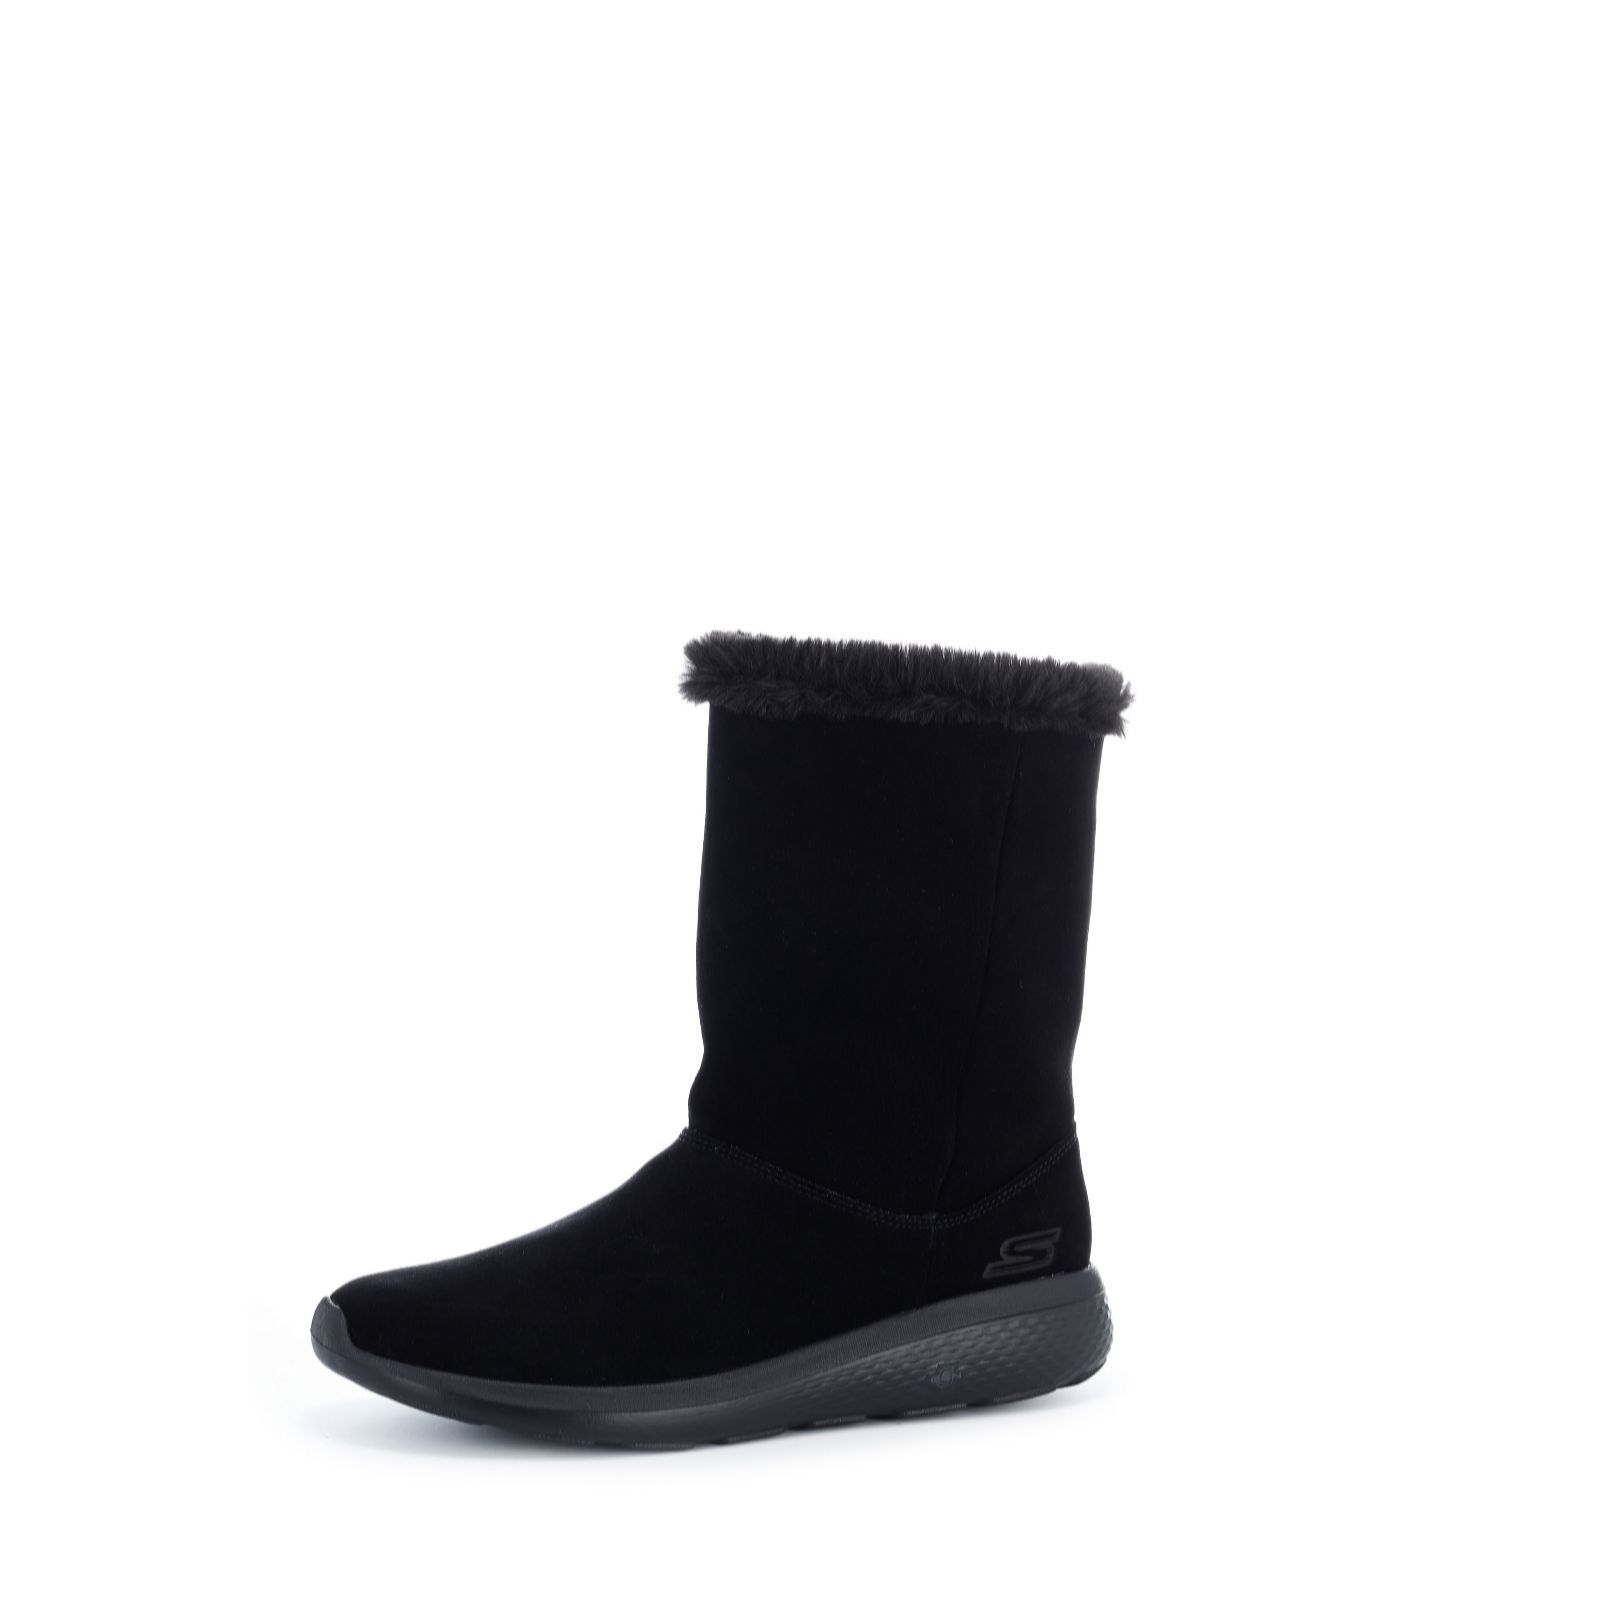 Outlet Skechers On the GO City 2 Suede Mid Calf Boot with Faux Fur Lining QVC UK